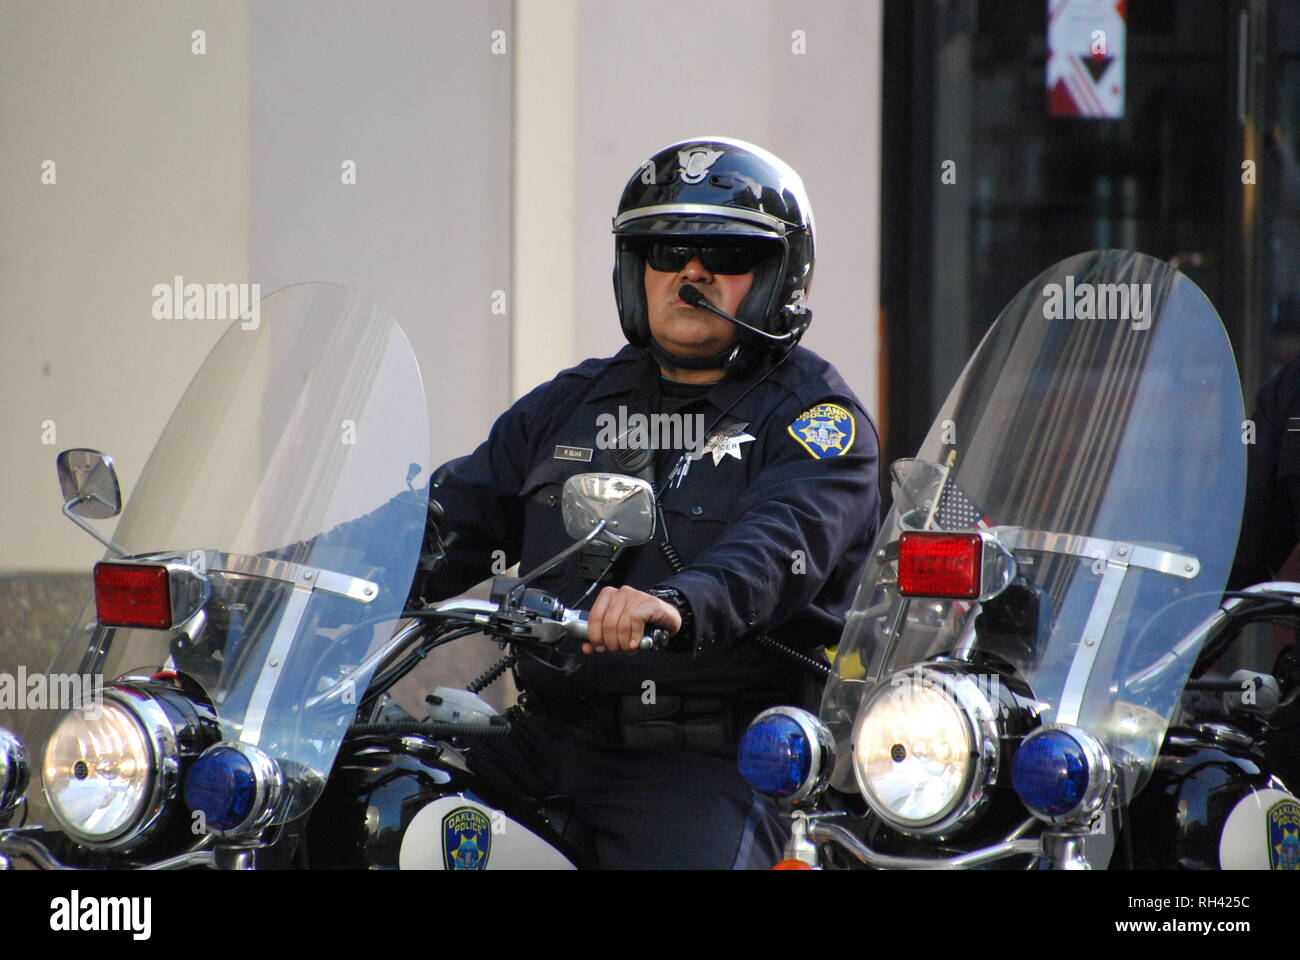 Oakland police Officer Pedro Elias patrols on motorcycle outside a Kamala Harris for President rally in downtown Oakland on Jan. 27, 2019. Stock Photo